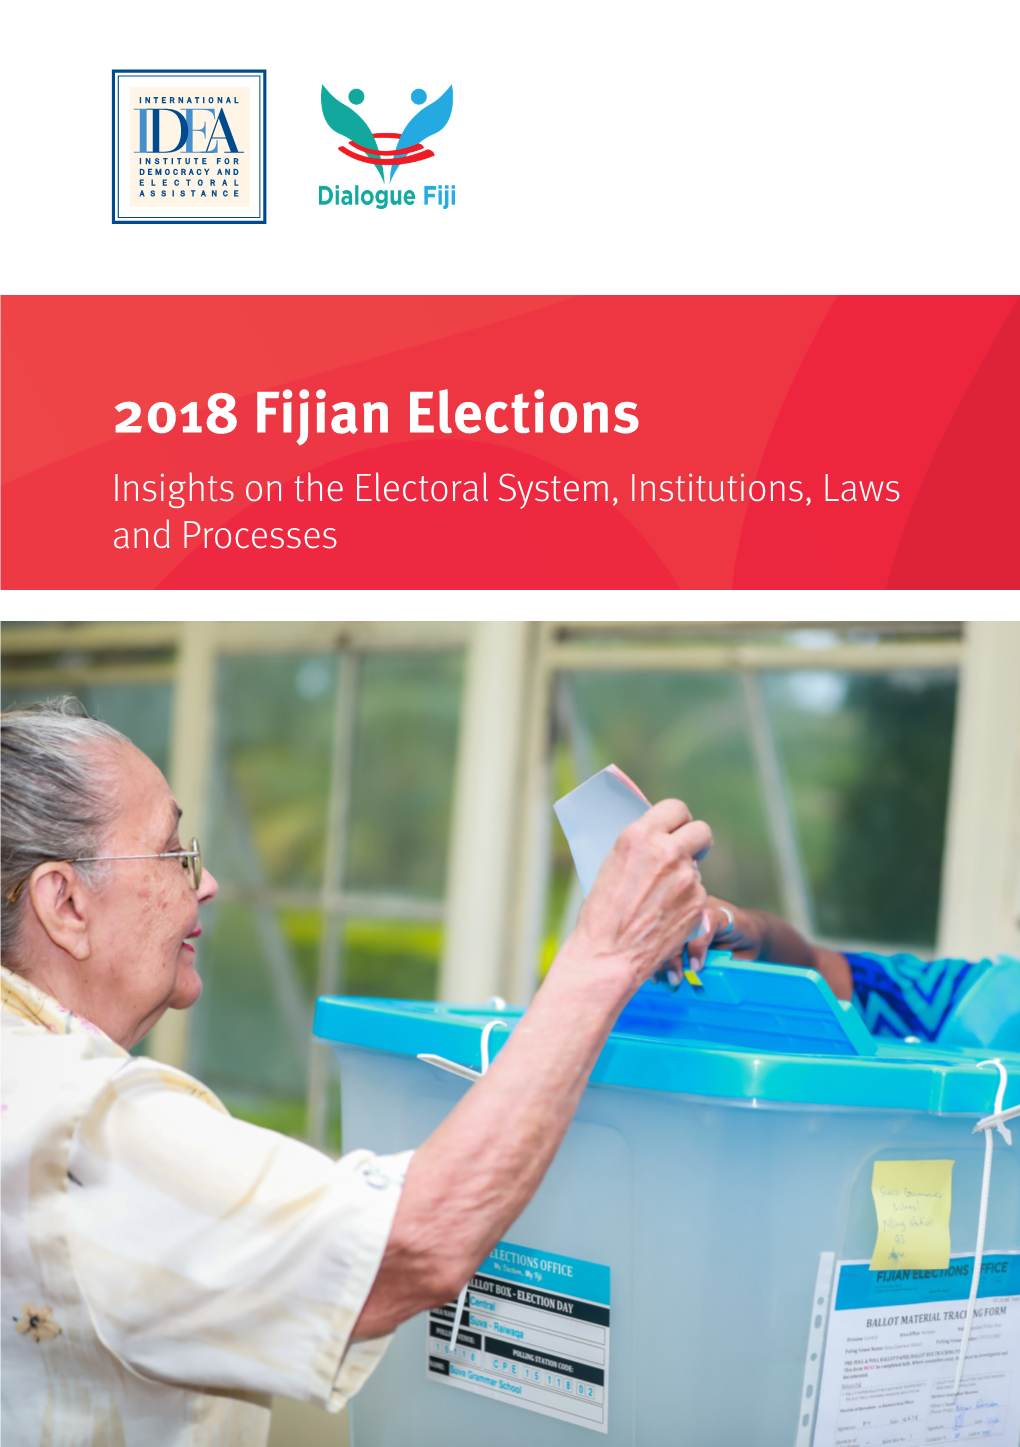 2018 Fijian Elections Insights on the Electoral System, Institutions, Laws and Processes 2018 Fijian Elections